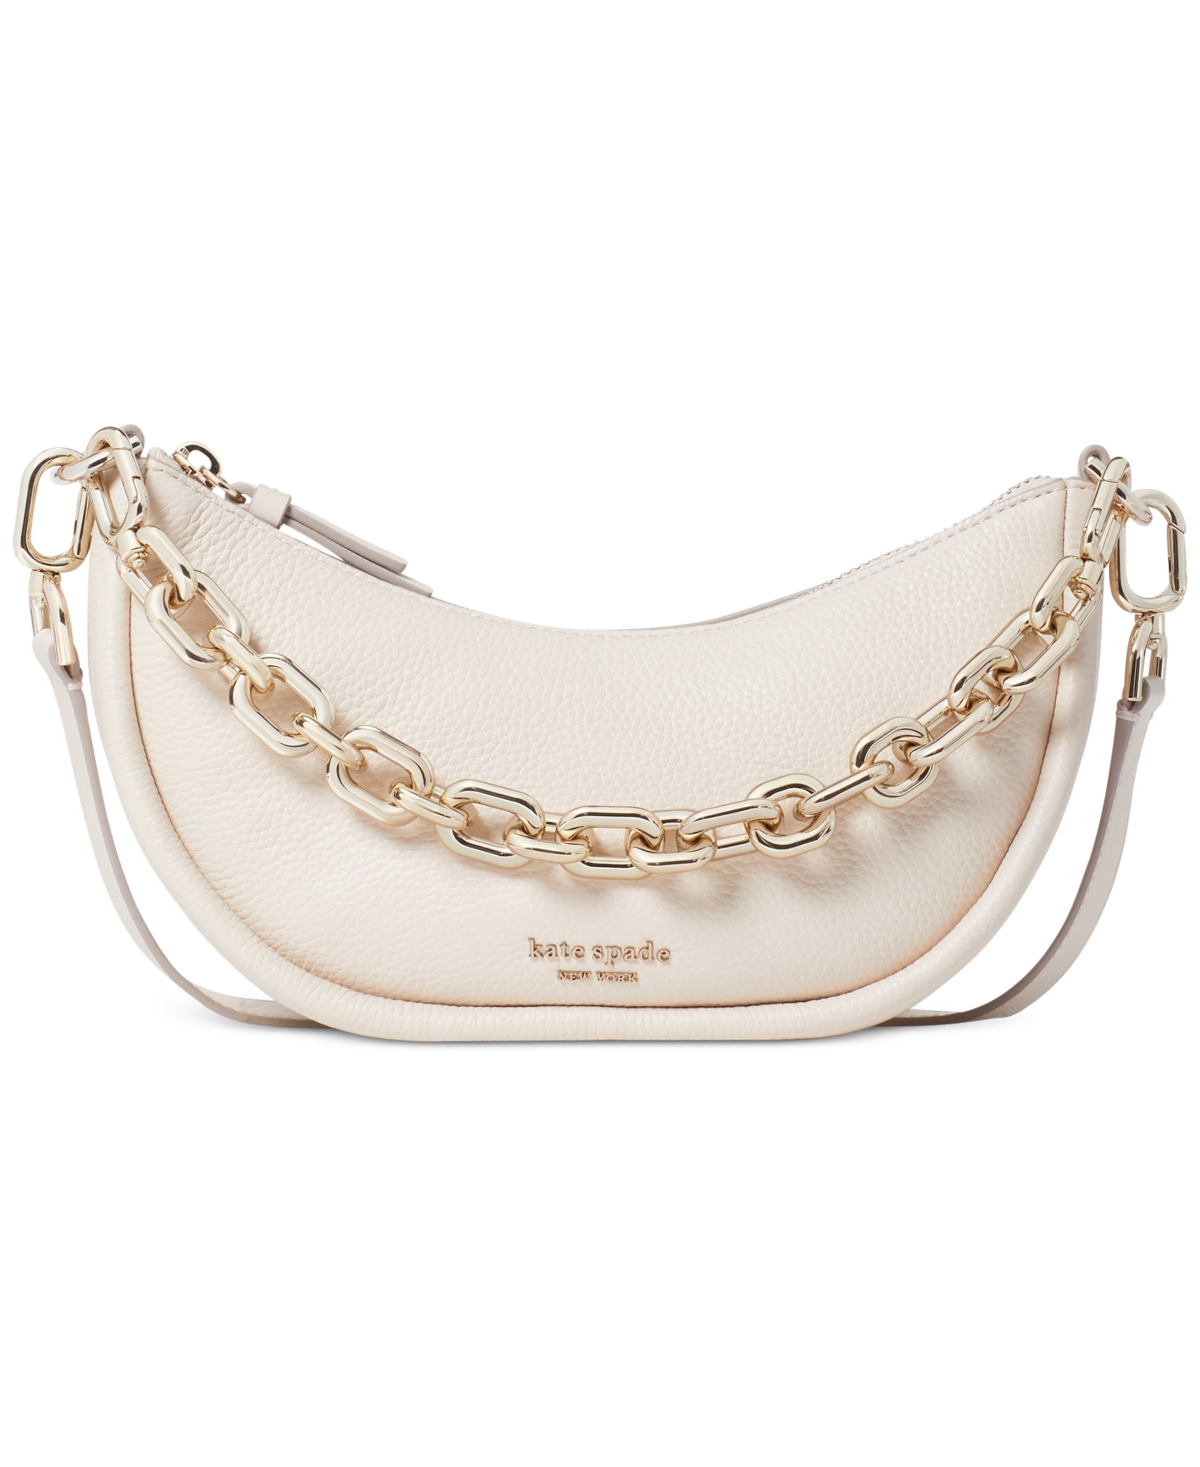 Kate Spade New York Bright White Raffia Floral Reiley Leather Crossbody Bag  | Best Price and Reviews | Zulily